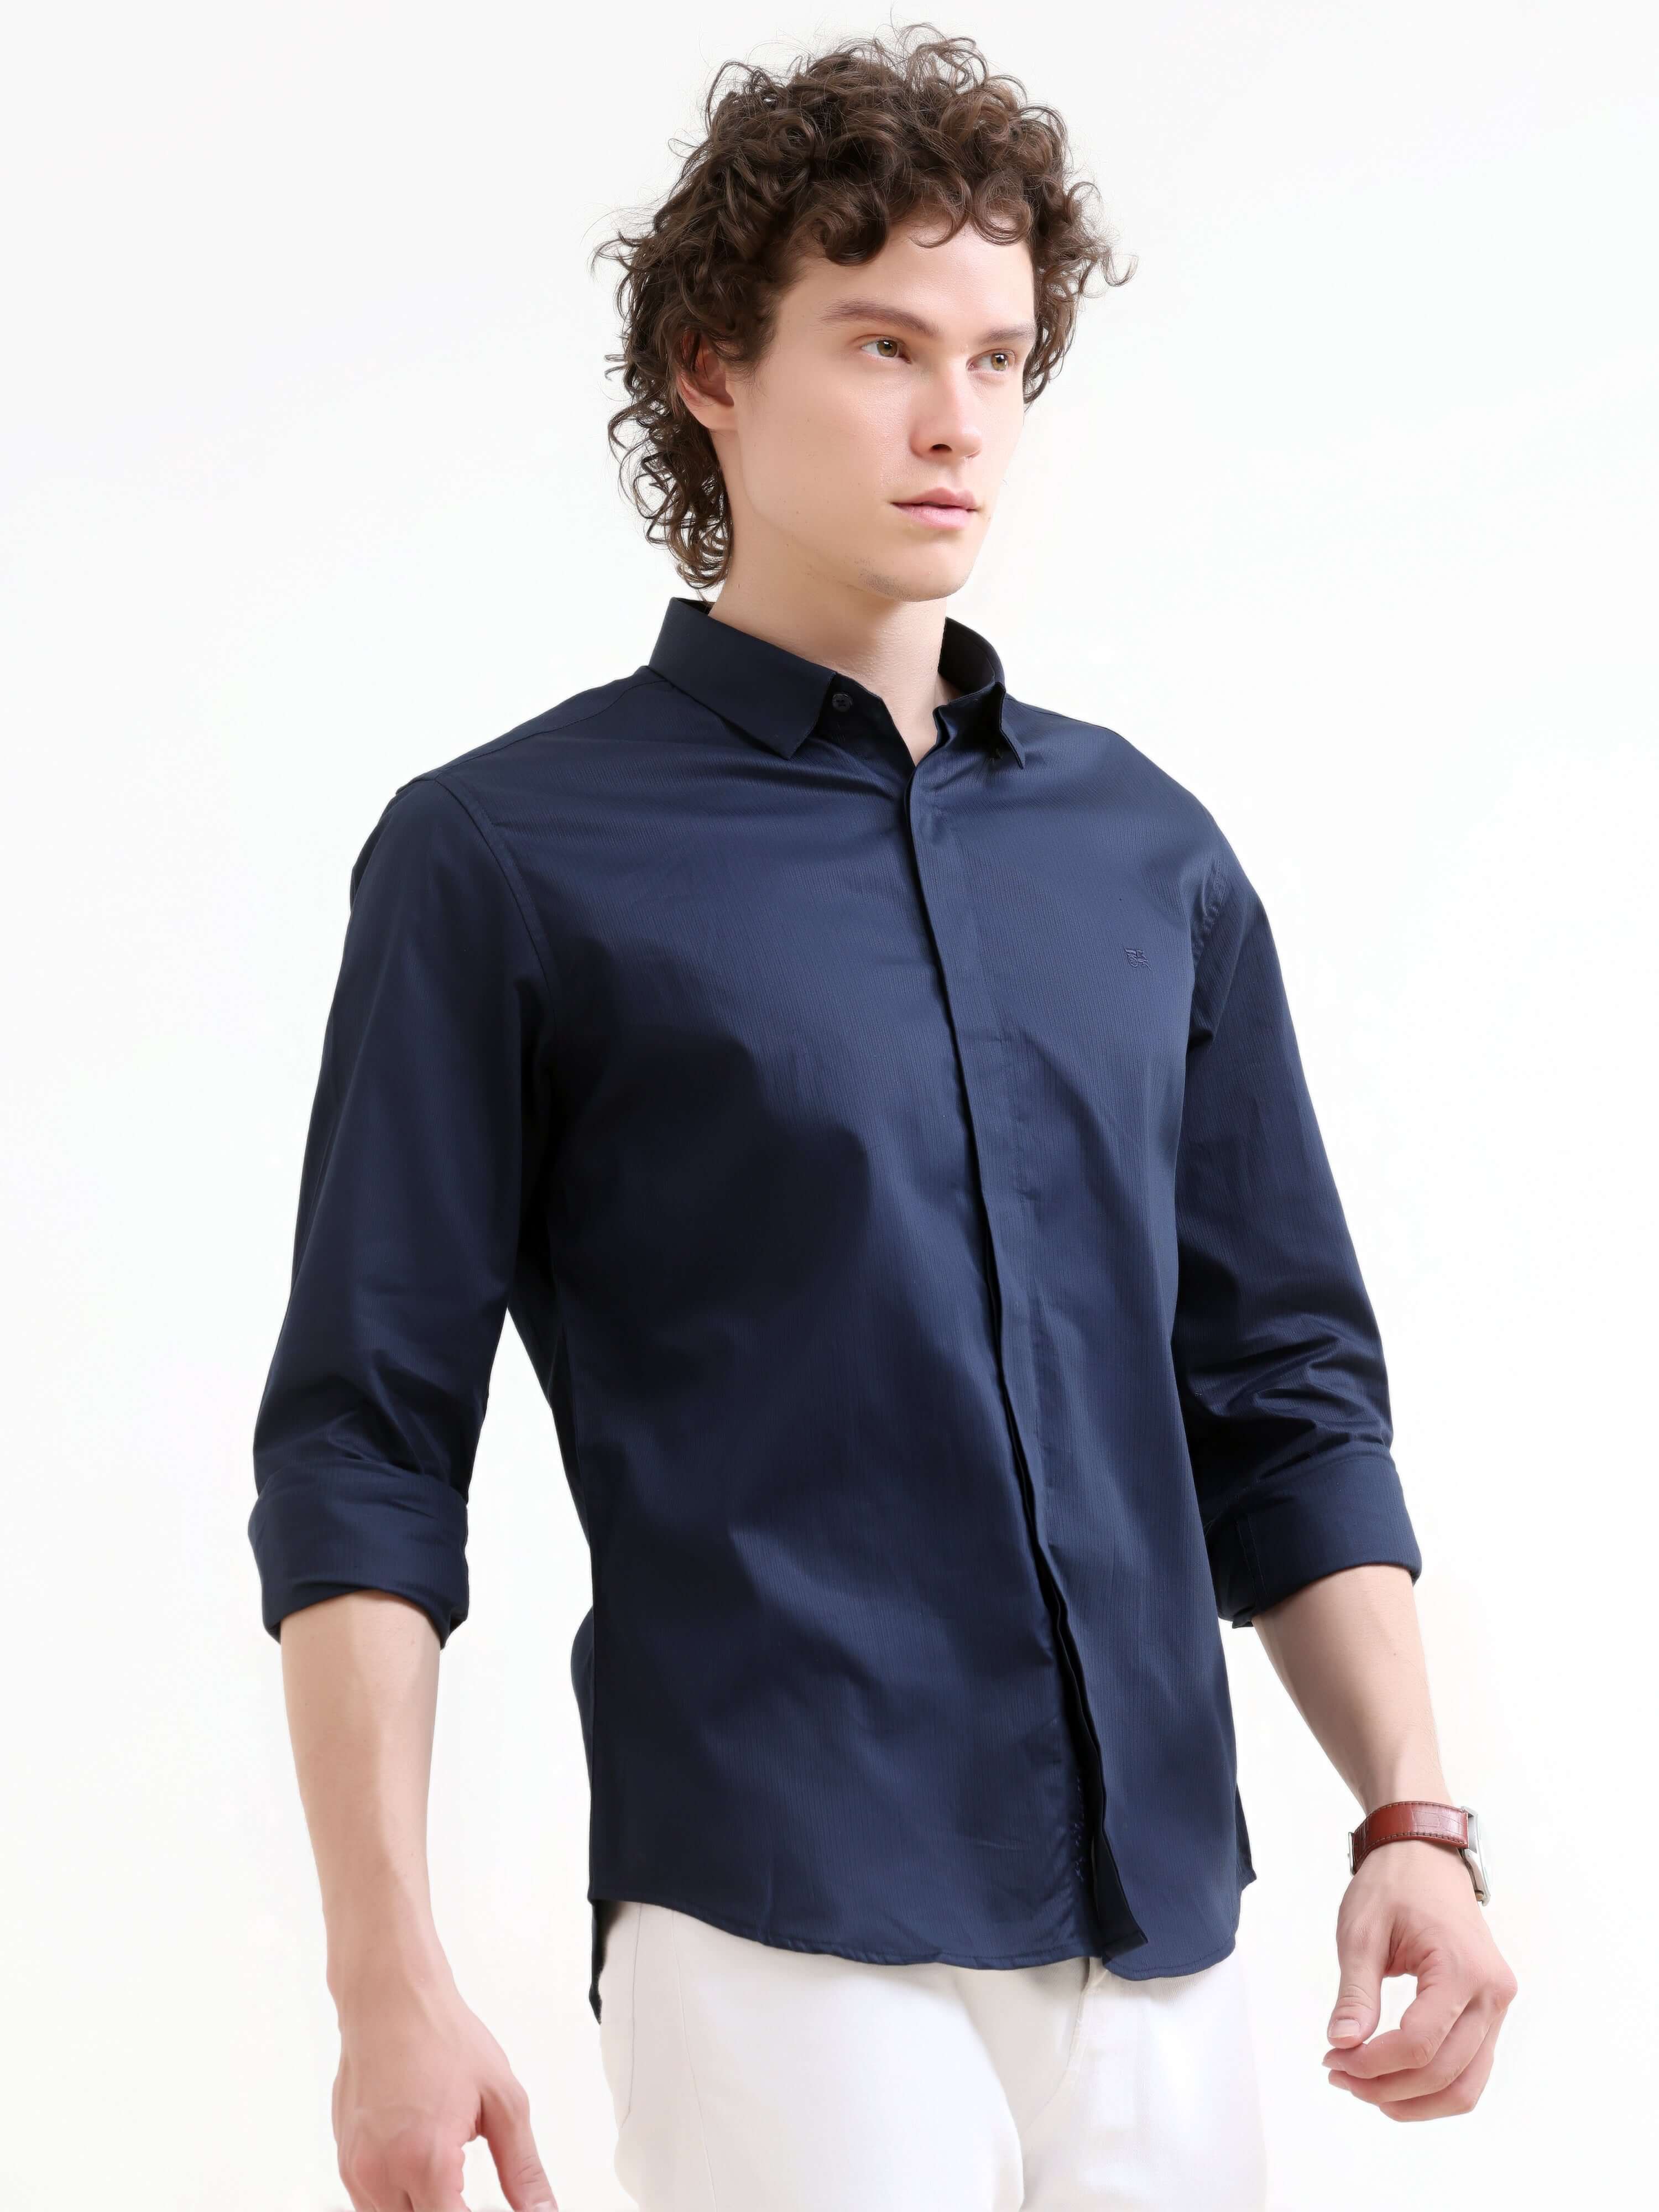 Navy Blue Solid Shirt - New Men's Summer Arrival shop online at Estilocus. Elevate your style with our Navy Blue Solid Shirt. Perfect for summer, crafted for elegance and a comfortable fit. Shop the latest in men's casual wear now!